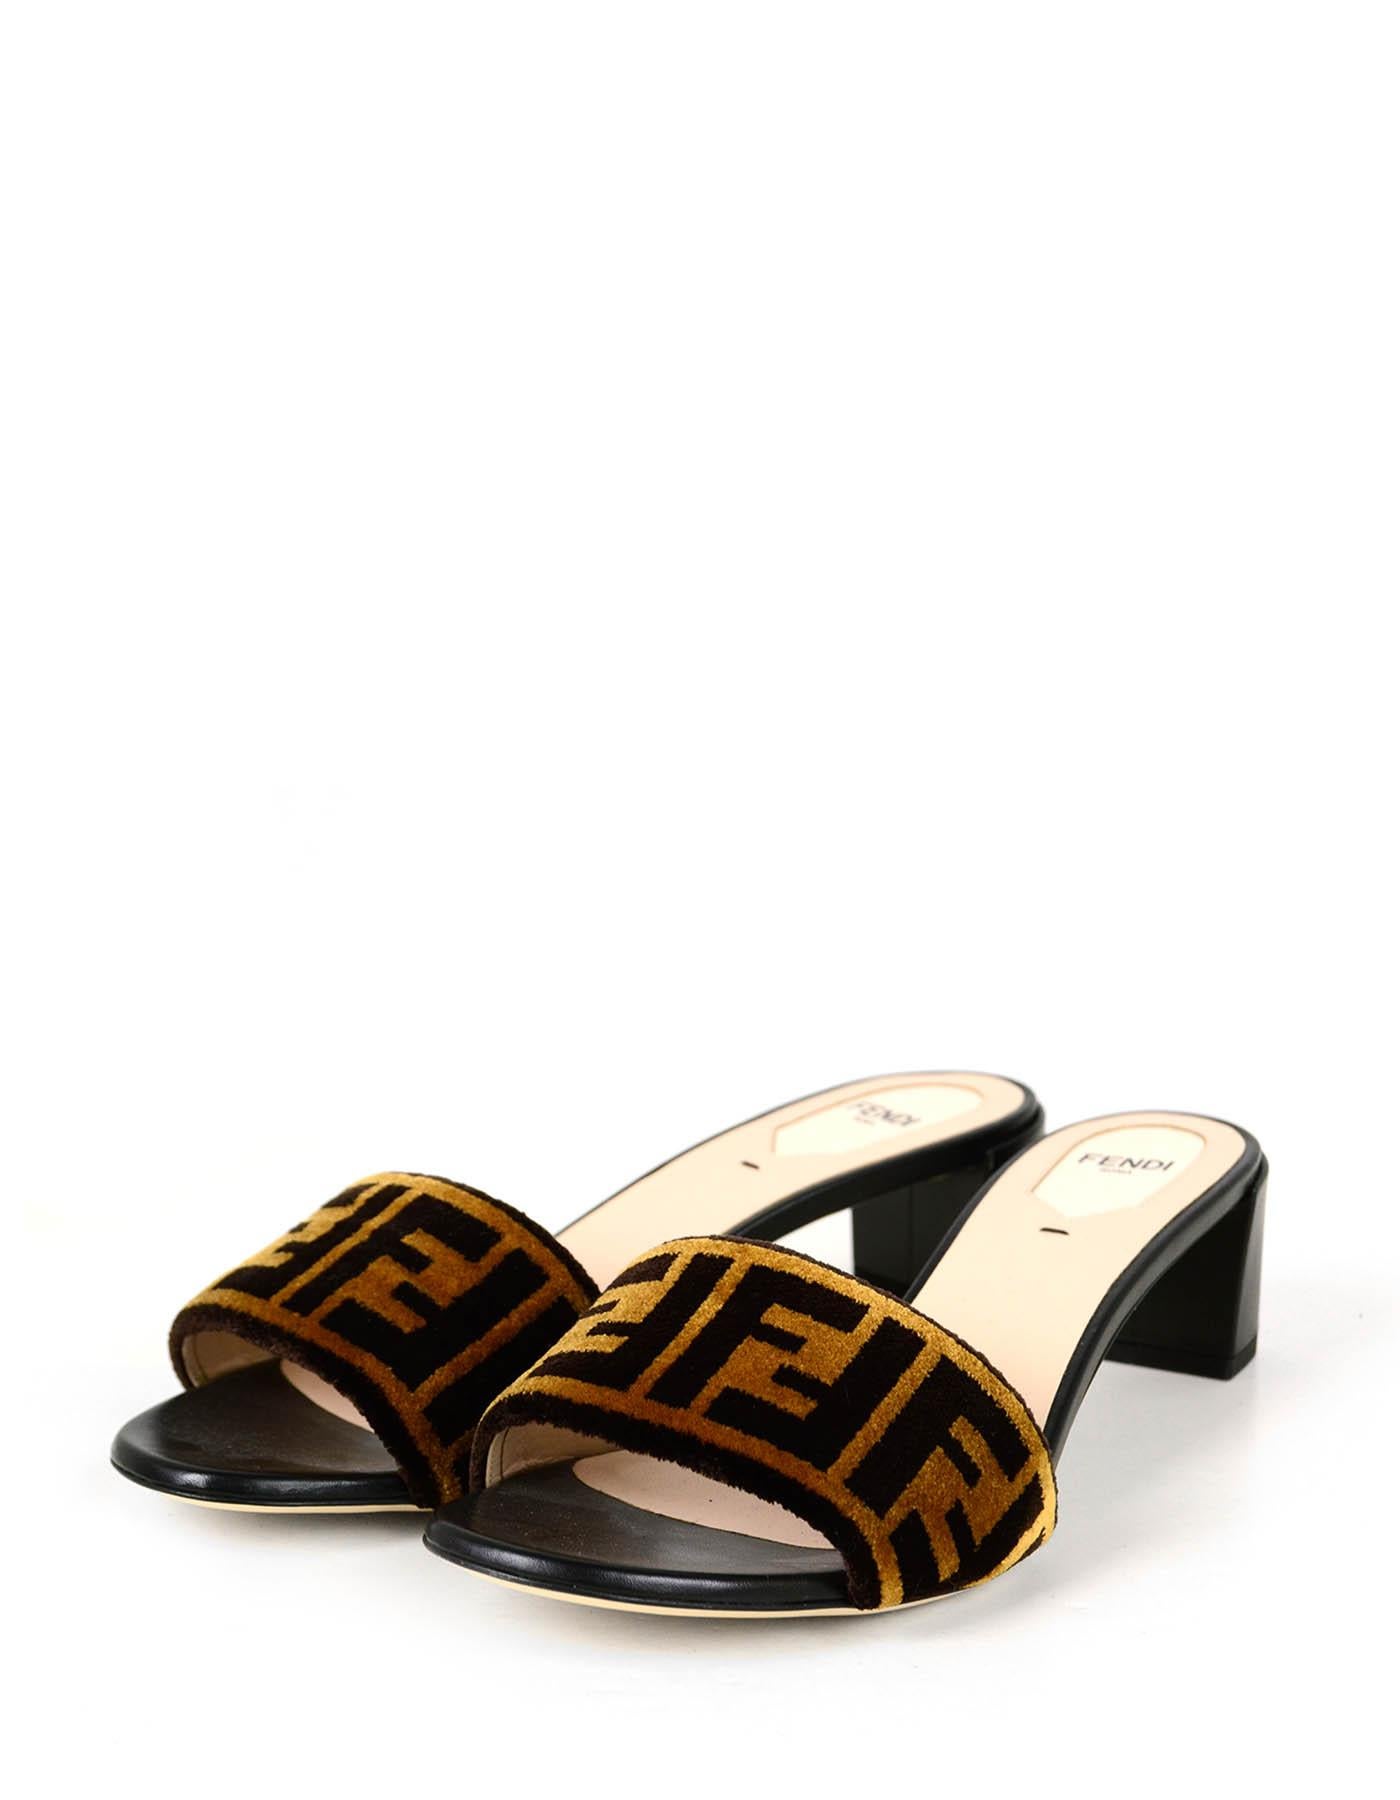 Fendi NEW Logo Print Velvet & Leather Mules

Made In: Italy
Color: Brown
Materials: Velvet & leather
Closure/Opening: Slip-on
Overall Condition: New.  Does not include box or dustbag.
Estimated Retail: $650

Marked Size: 39.5
Heel Height: 2”